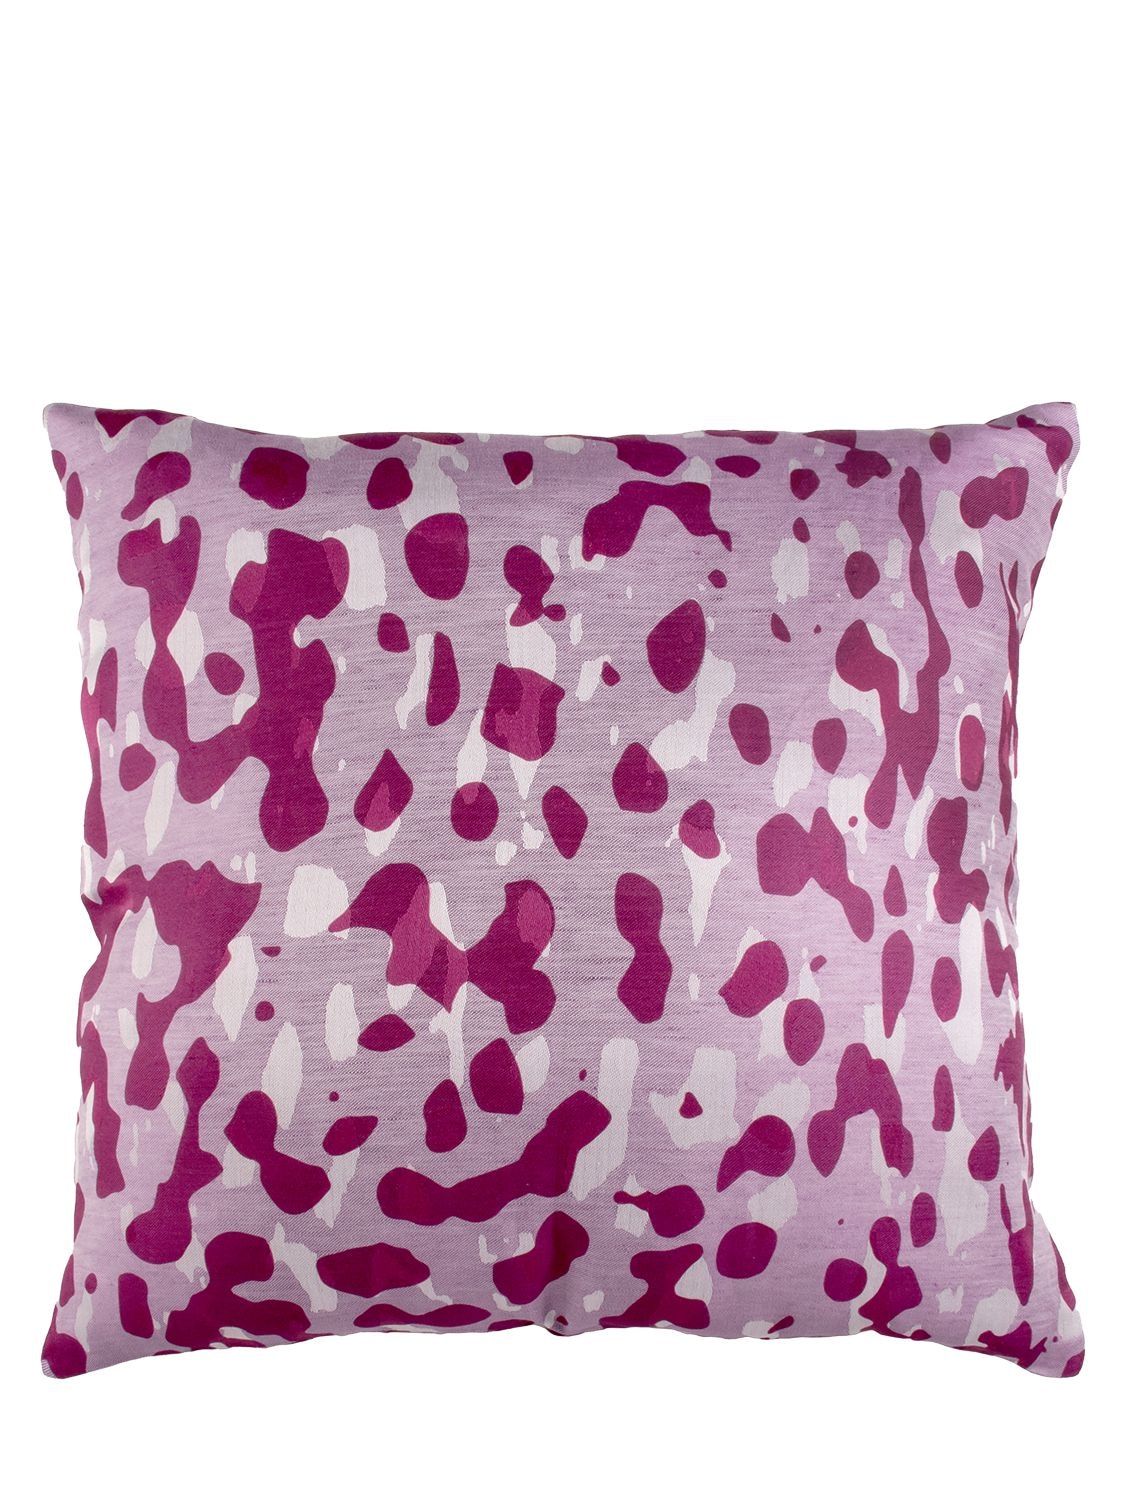 Stories Of Italy Plum Cushion In Pink